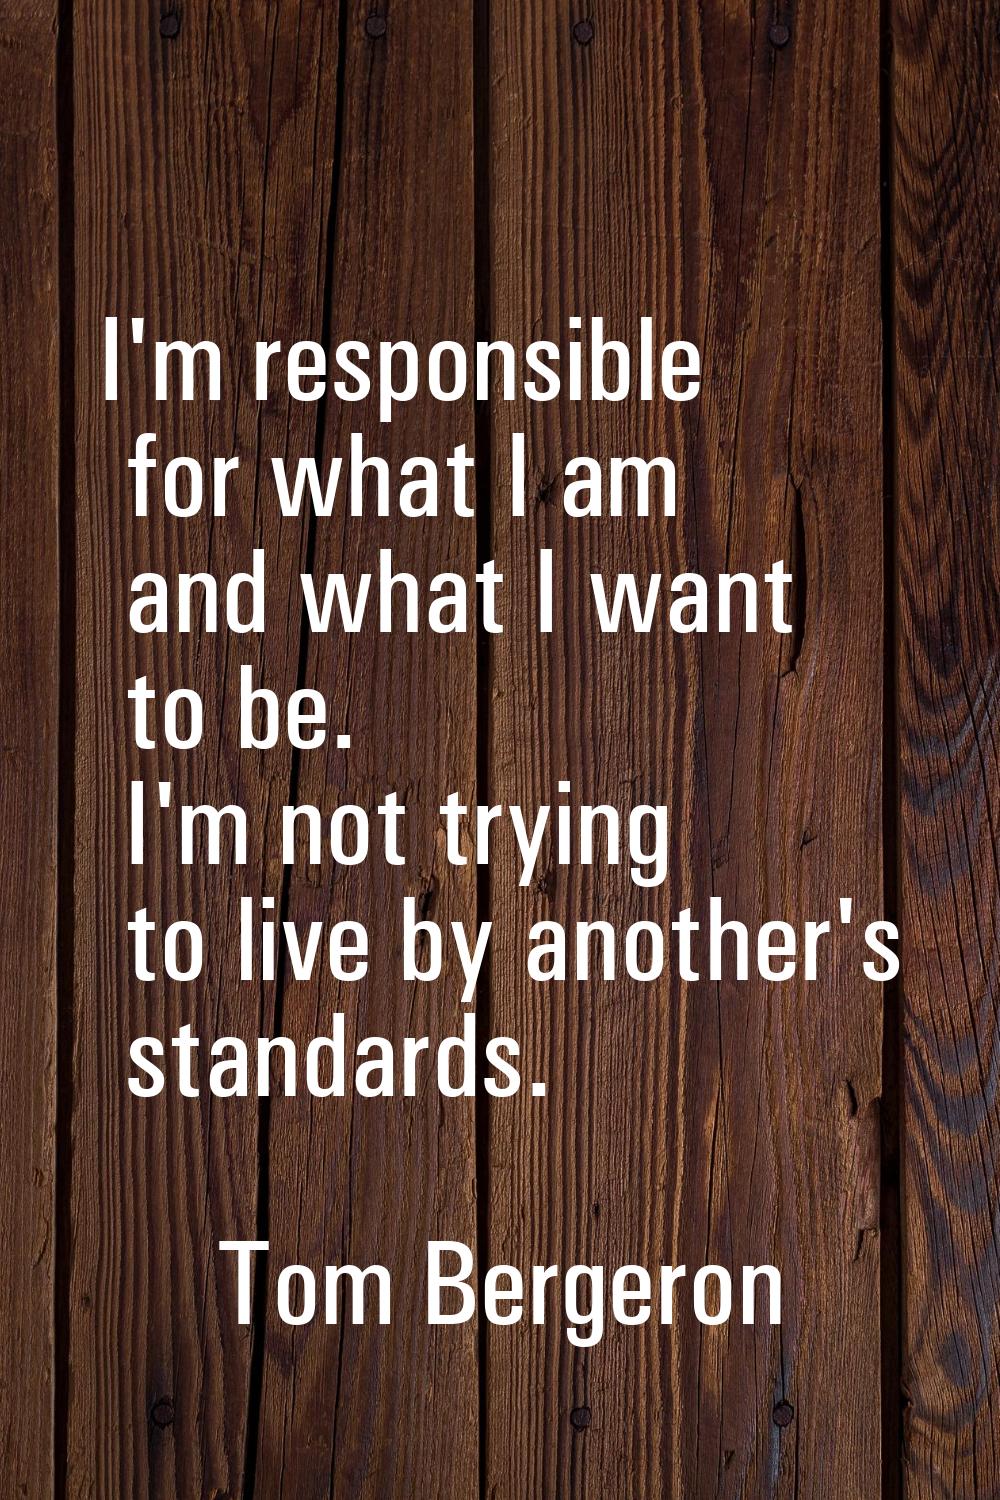 I'm responsible for what I am and what I want to be. I'm not trying to live by another's standards.